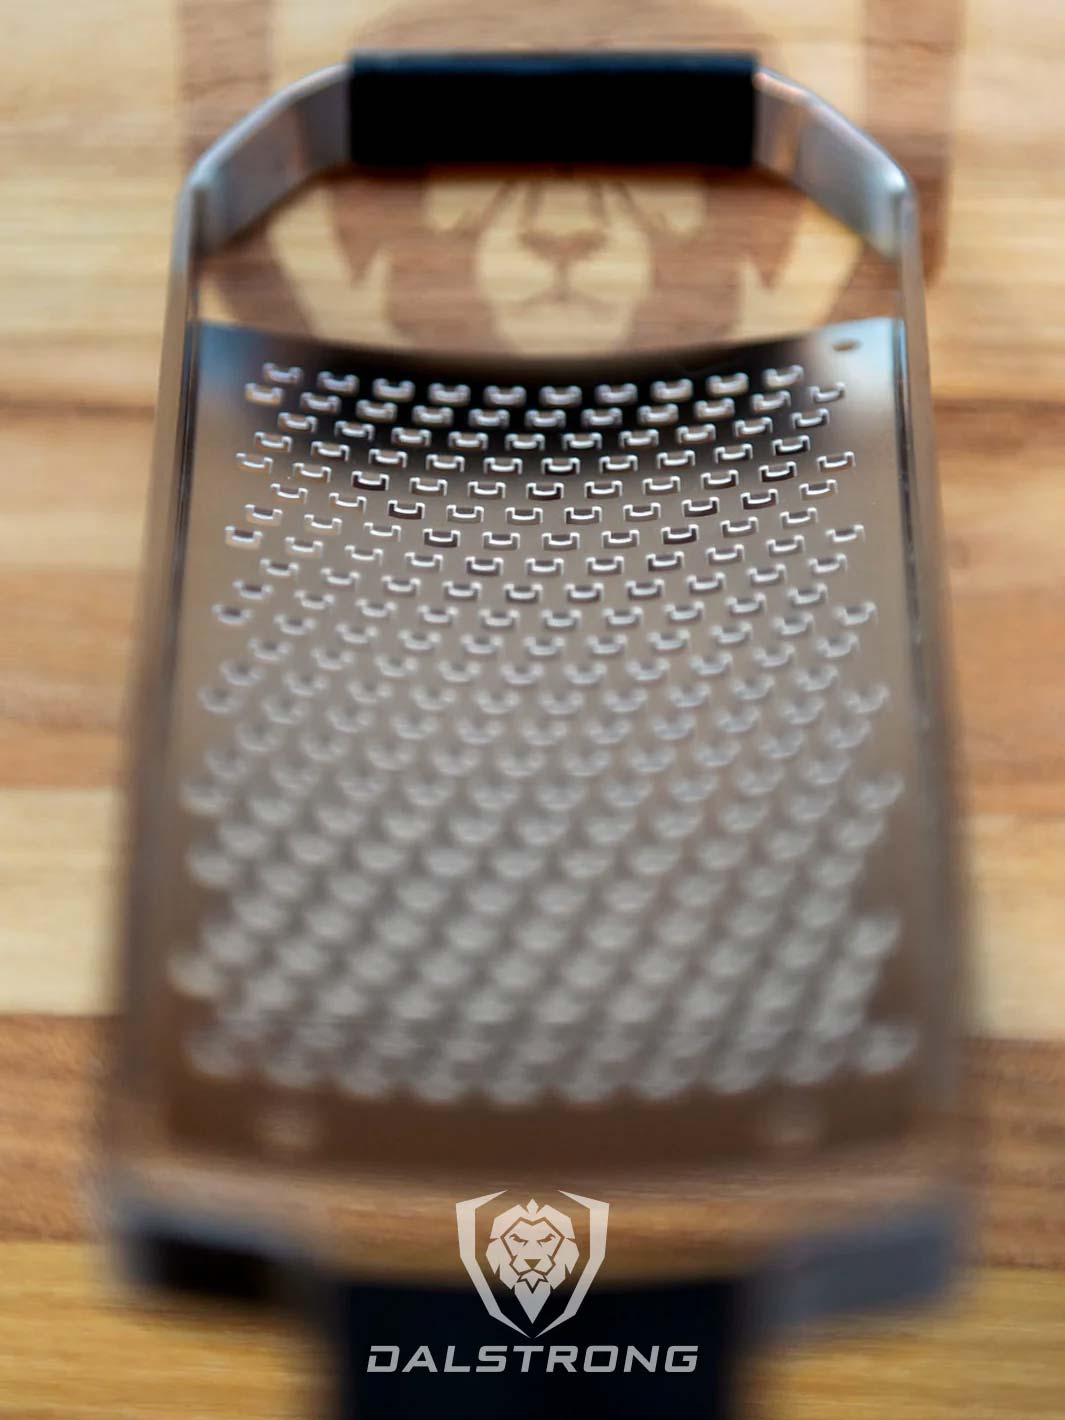 Dalstrong professional coarse wide cheese grater showcasing it's stainless steel grater.